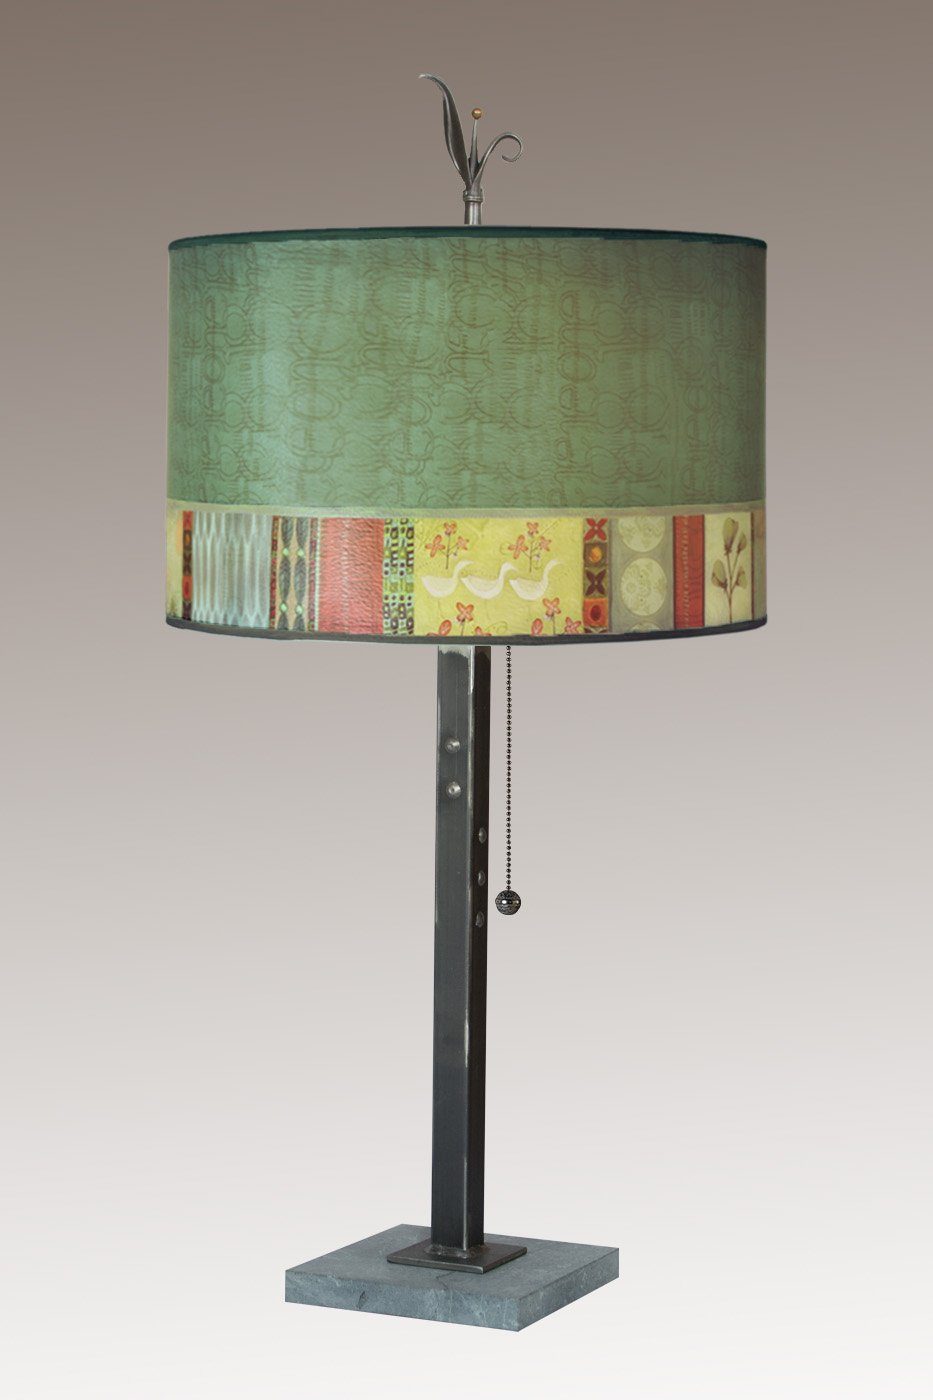 Janna Ugone & Co Table Lamps Steel Table Lamp with Large Drum Shade in Melody in Jade